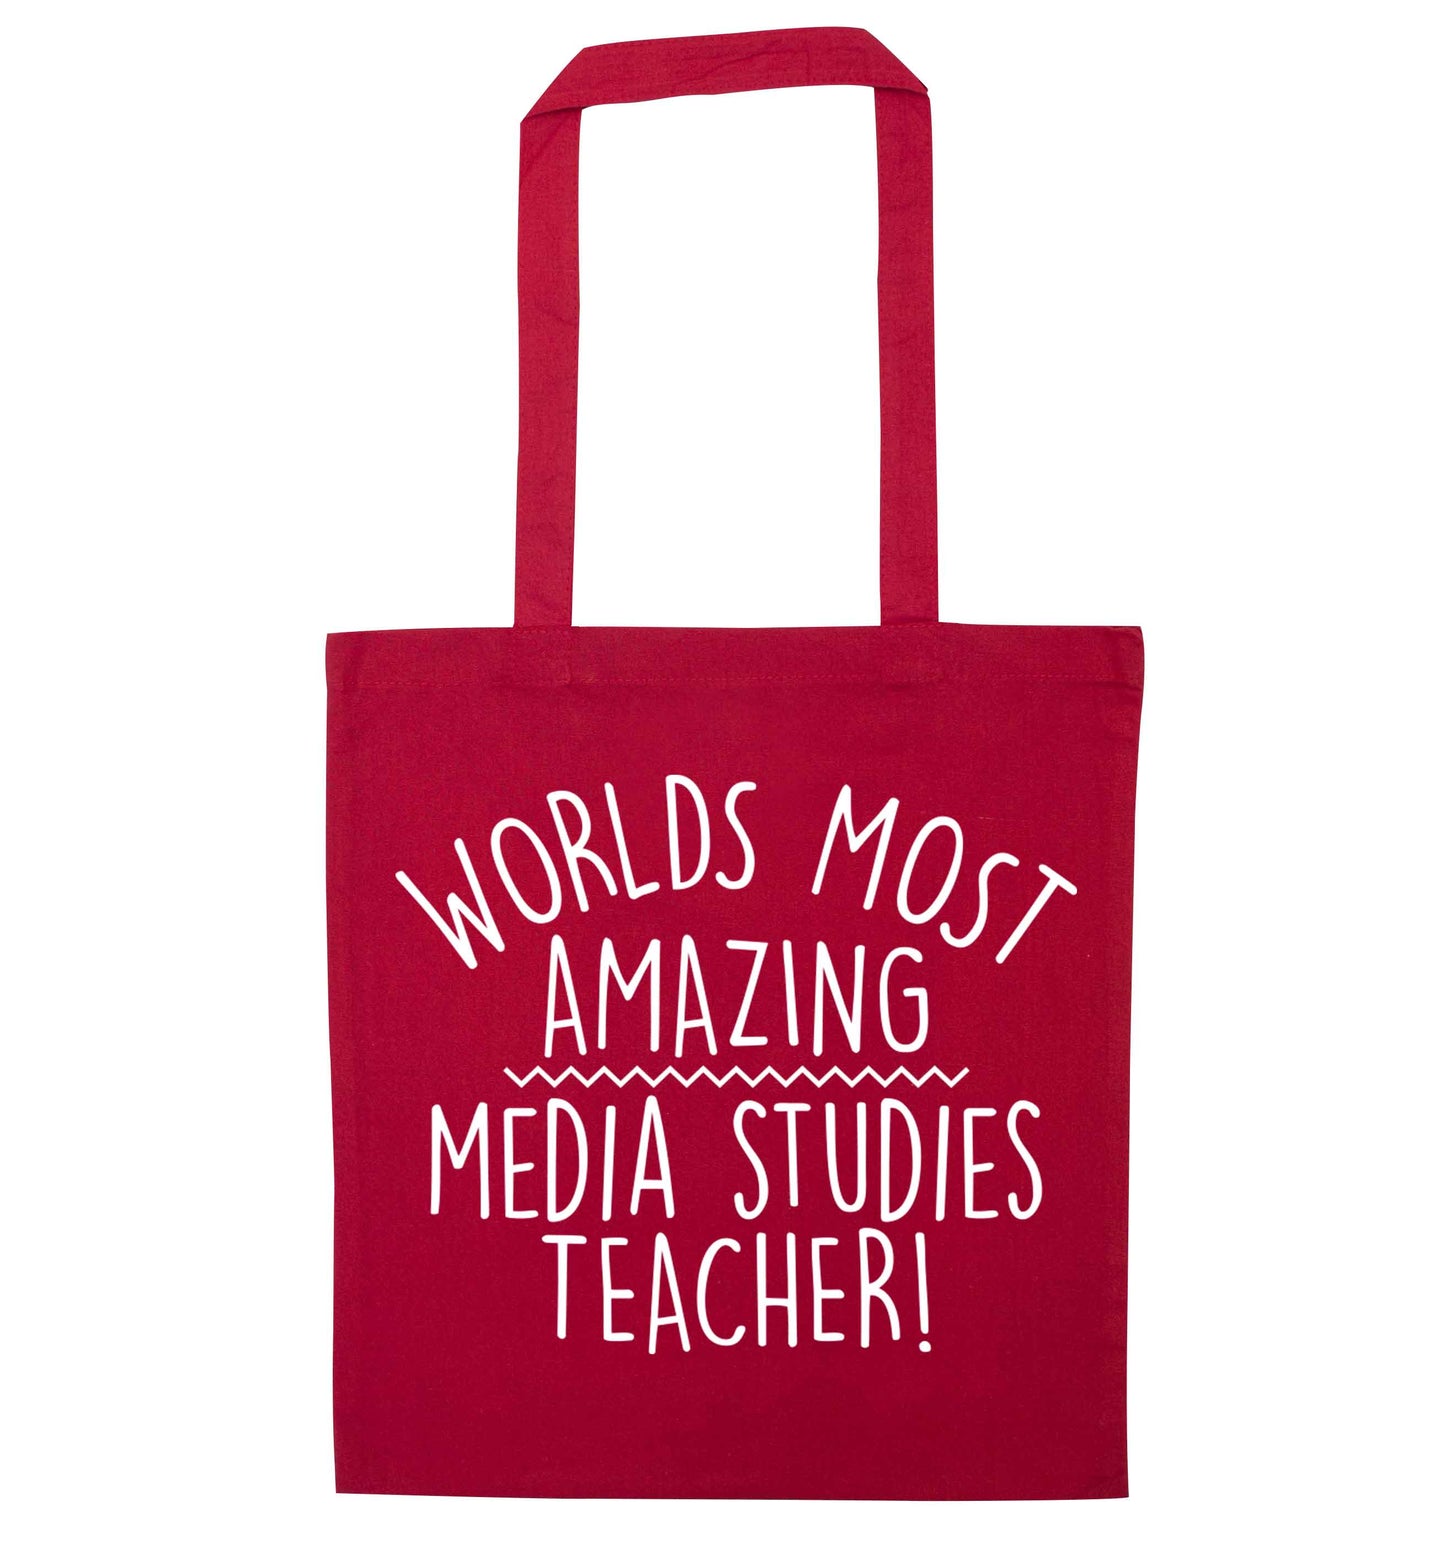 Worlds most amazing media studies teacher red tote bag